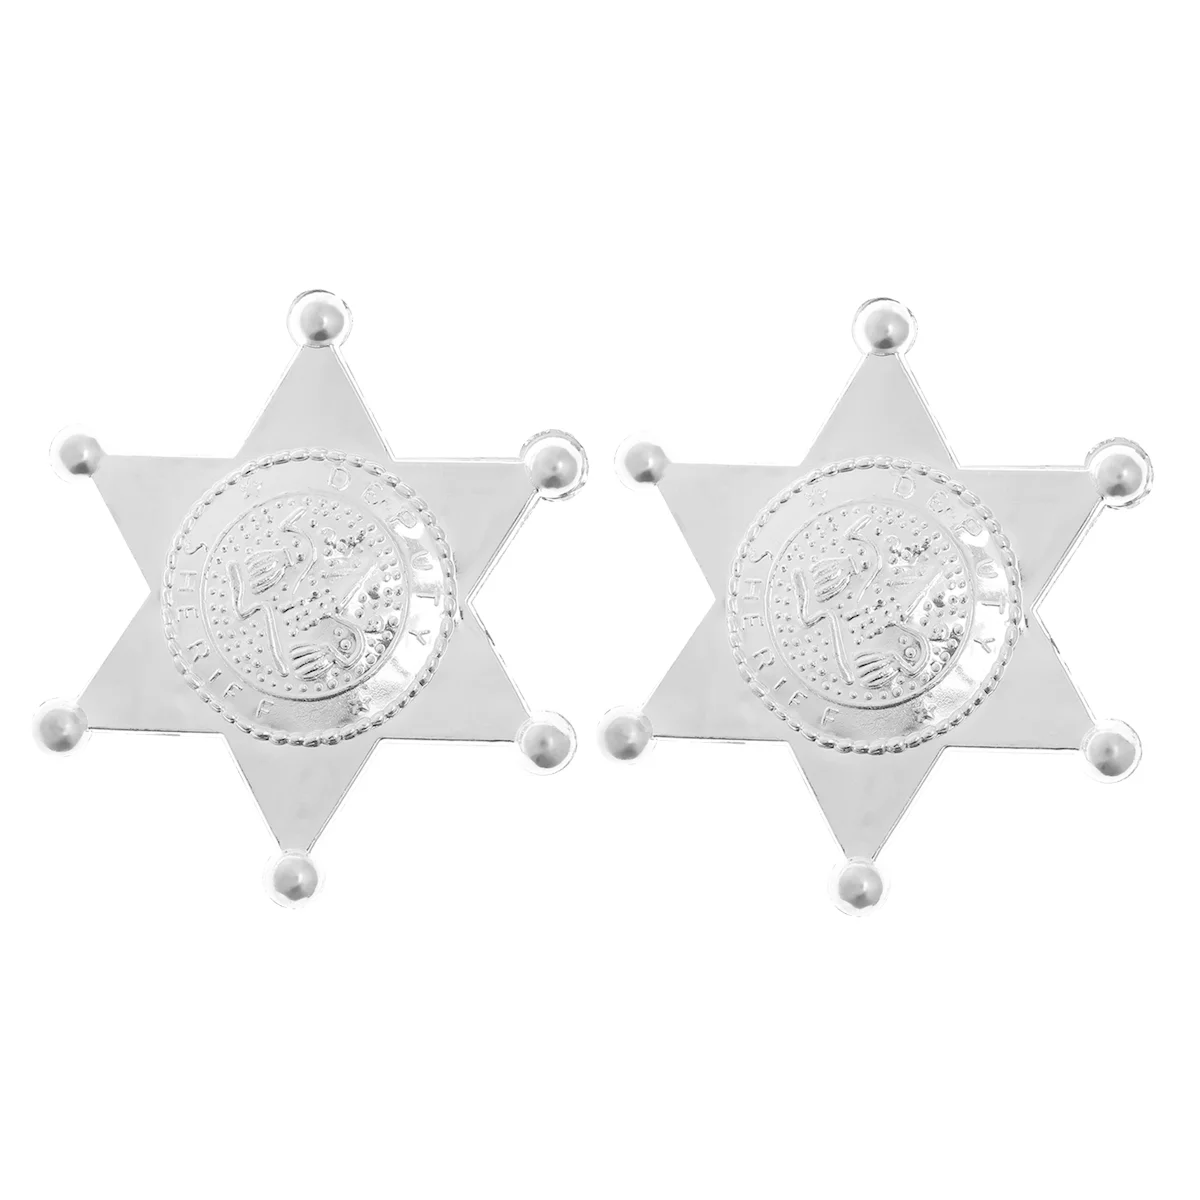 

12pcs Plastic Deputy Sheriff Hexagonal Star Badges Personalized Officer Name Tags Brooch for Law Enforcement Officer Costume